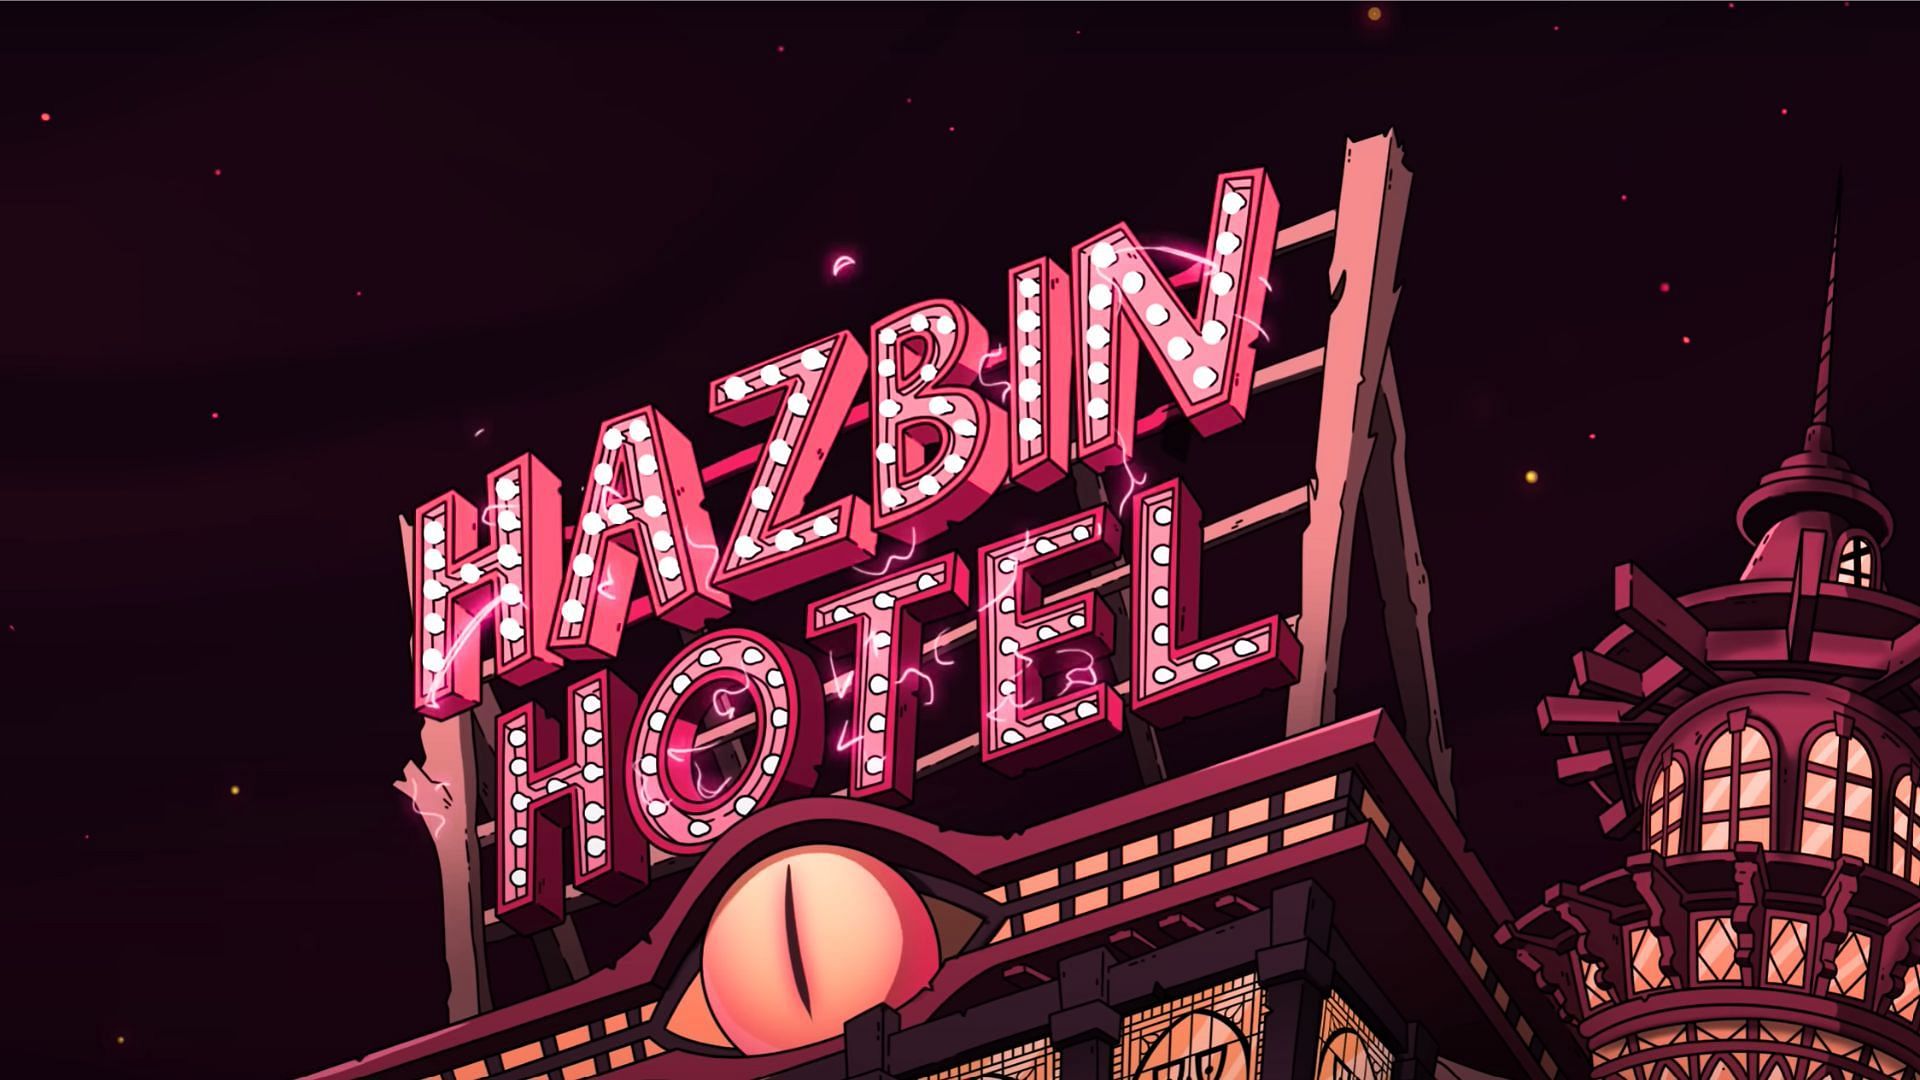 Hazbin Hotel has arrived with its first season on Amazon Prime Video (Image via Prime Video)